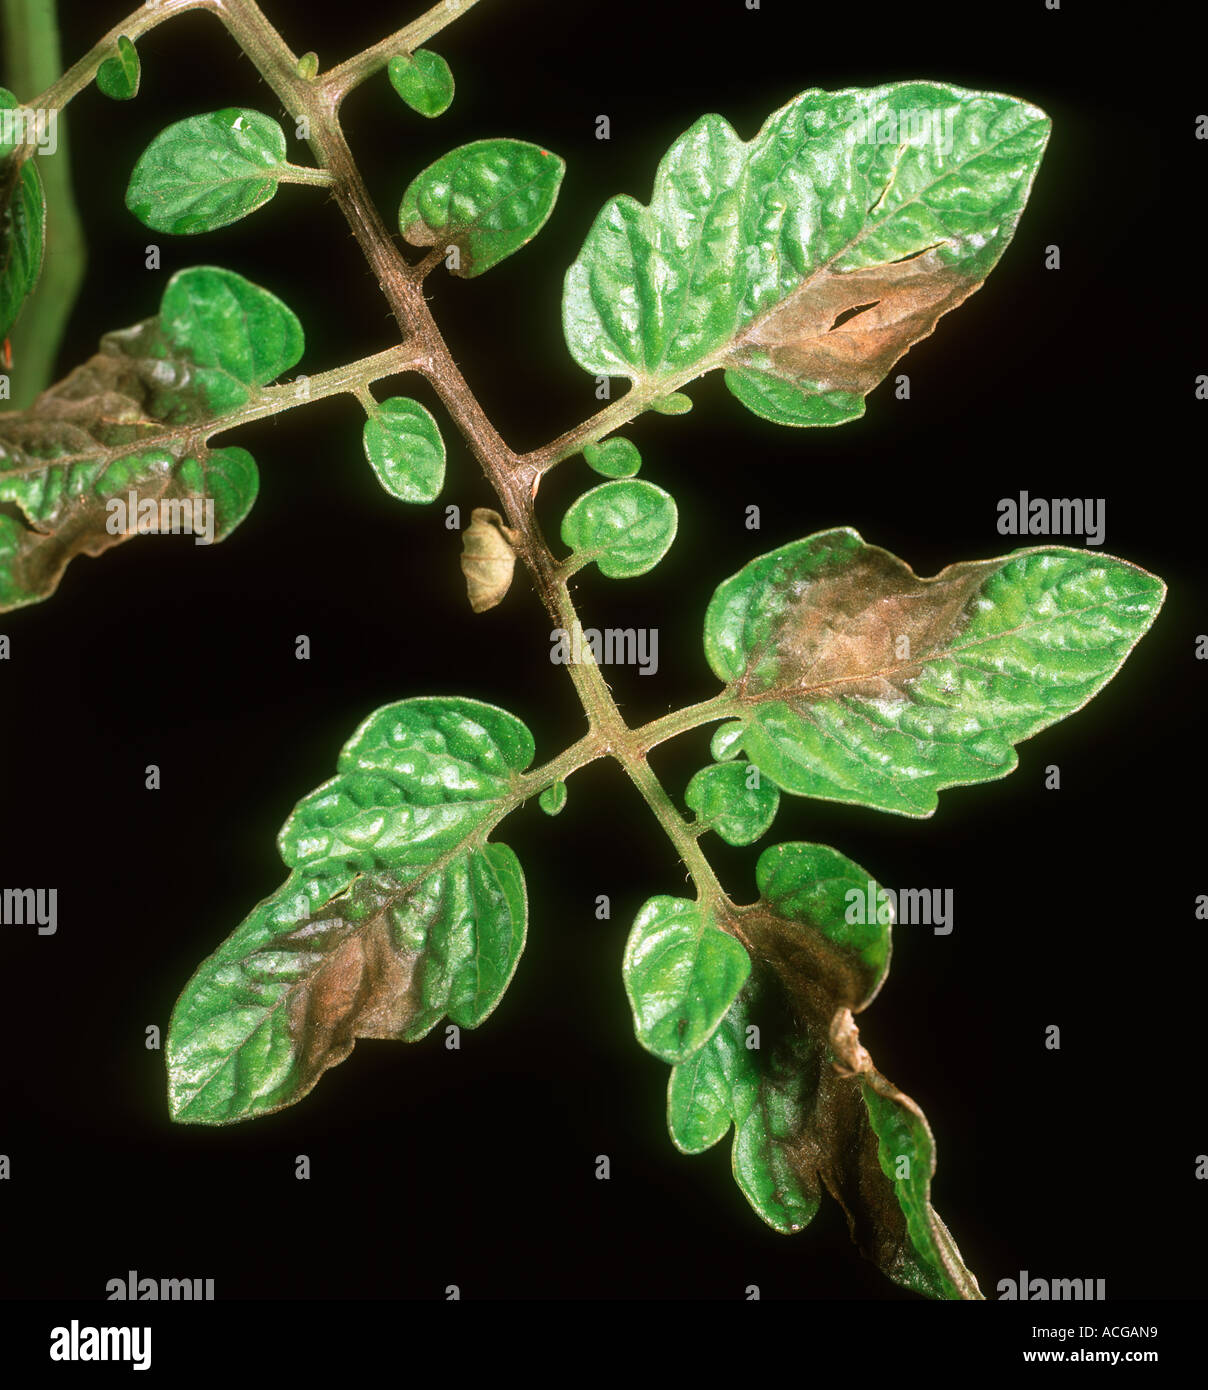 Tomato late blight Phytophthora infestans necrotic lesions on tomato leaves Stock Photo